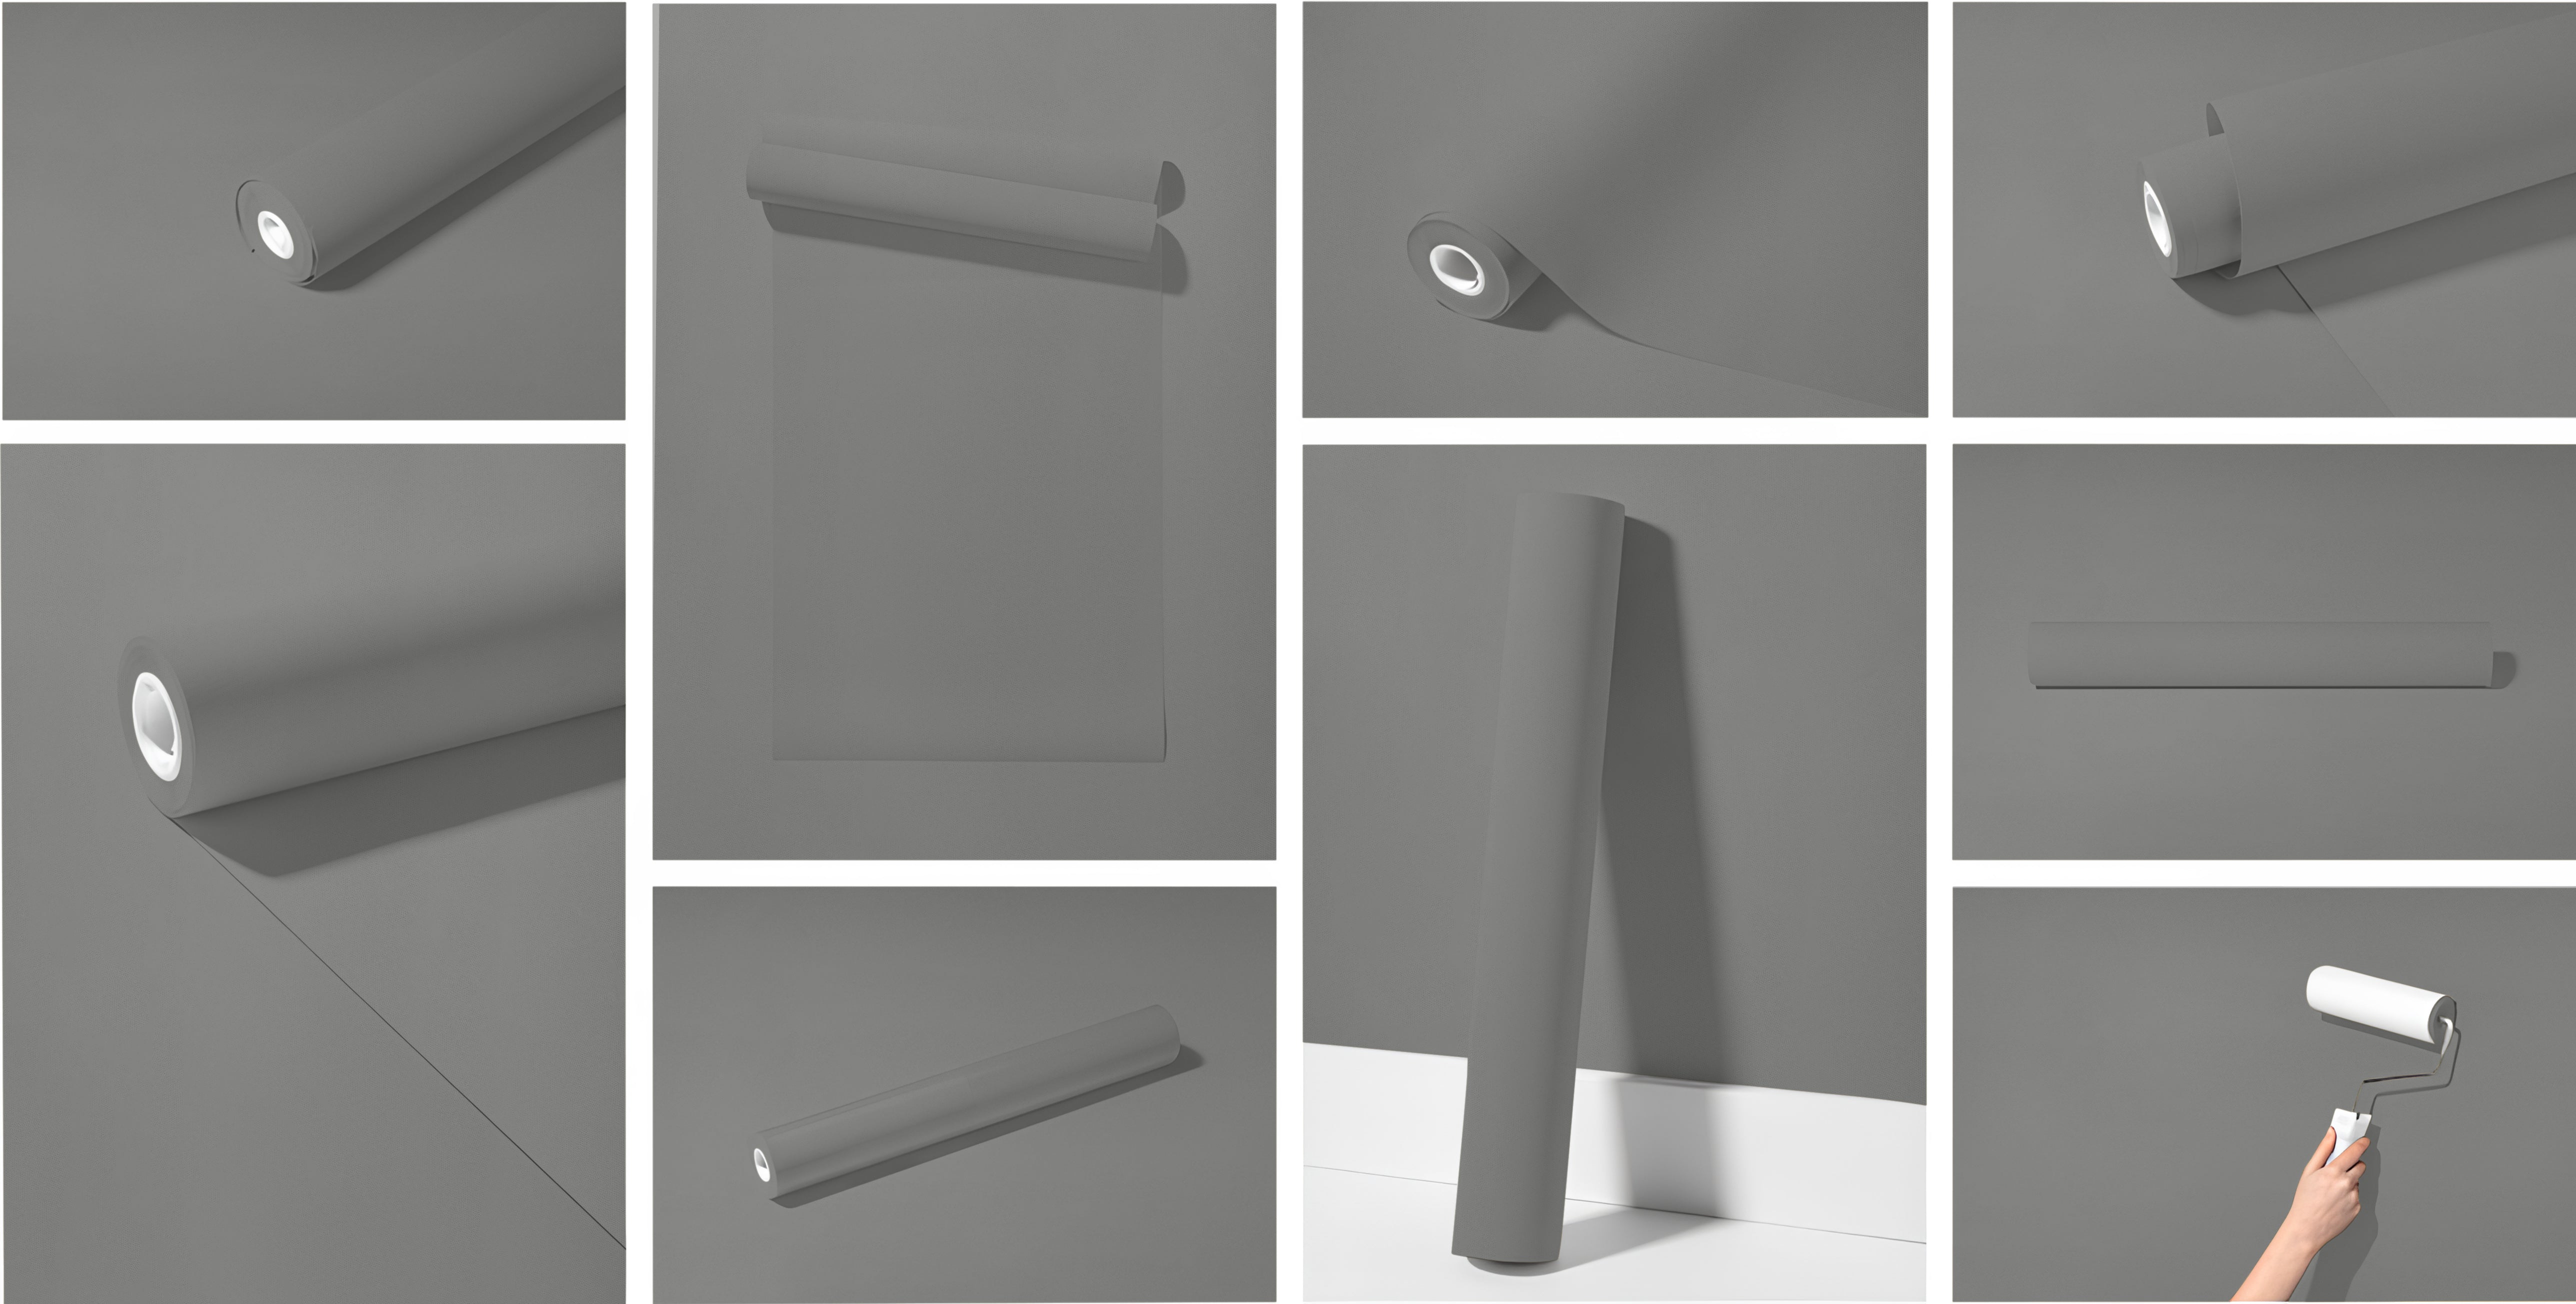 Peel & Stick Removable Re-usable Paint - Color RAL 9022 Pearl Light Grey - offRAL™ - RALRAW LLC, USA